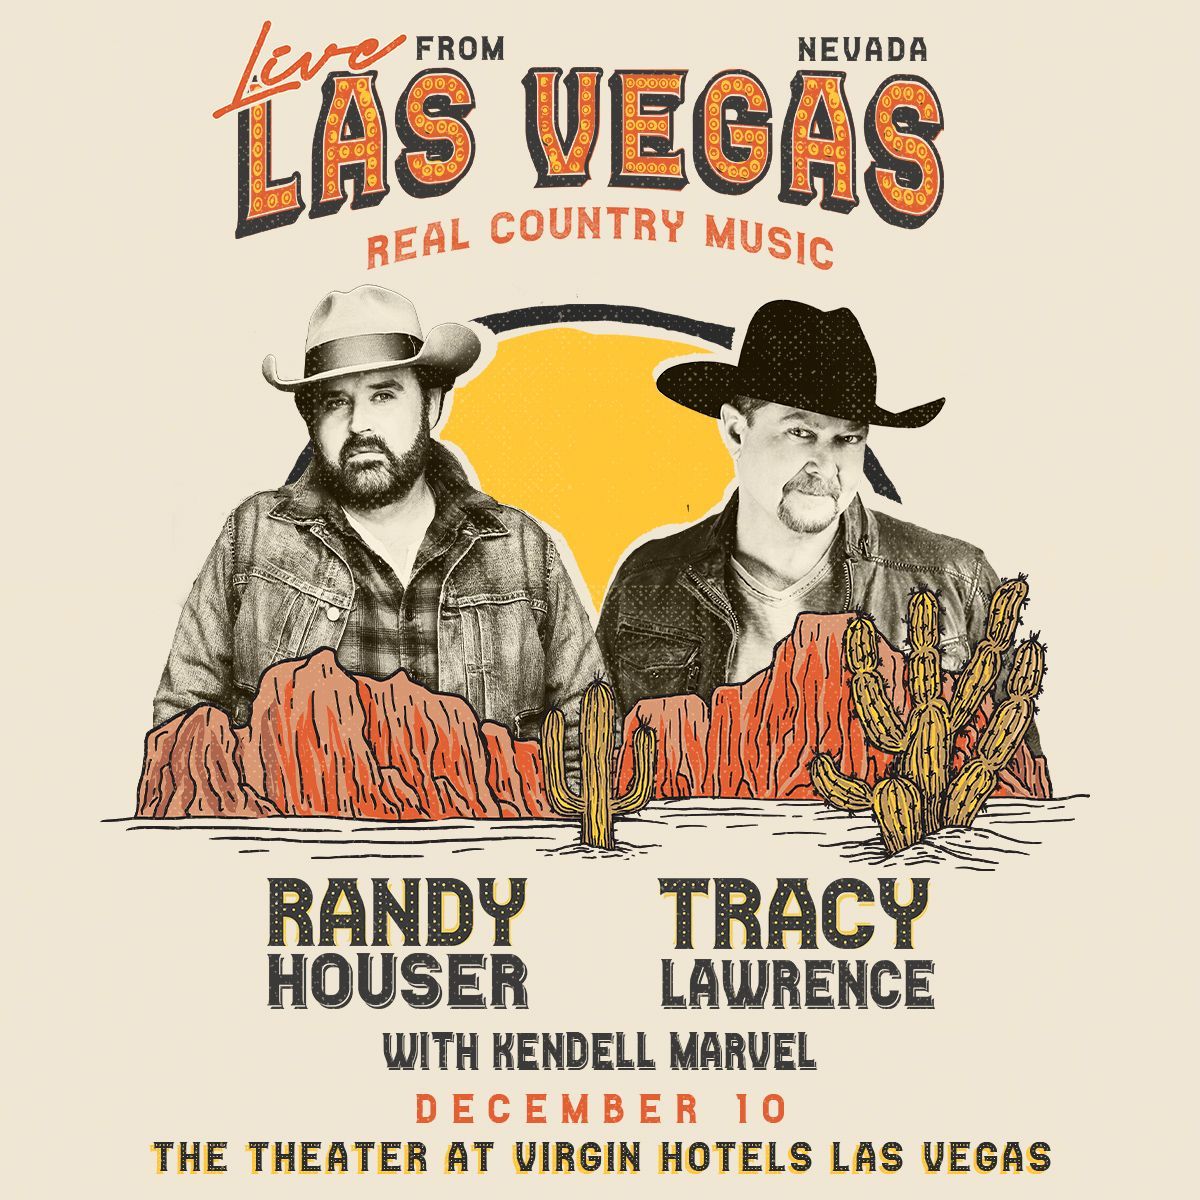 The Cowboy Channel on X: Randy Houser and Tracy Lawrence are lighting up  Las Vegas Live on Dec. 10 during the NFR and we've got FREE tickets for  you! Enter to win